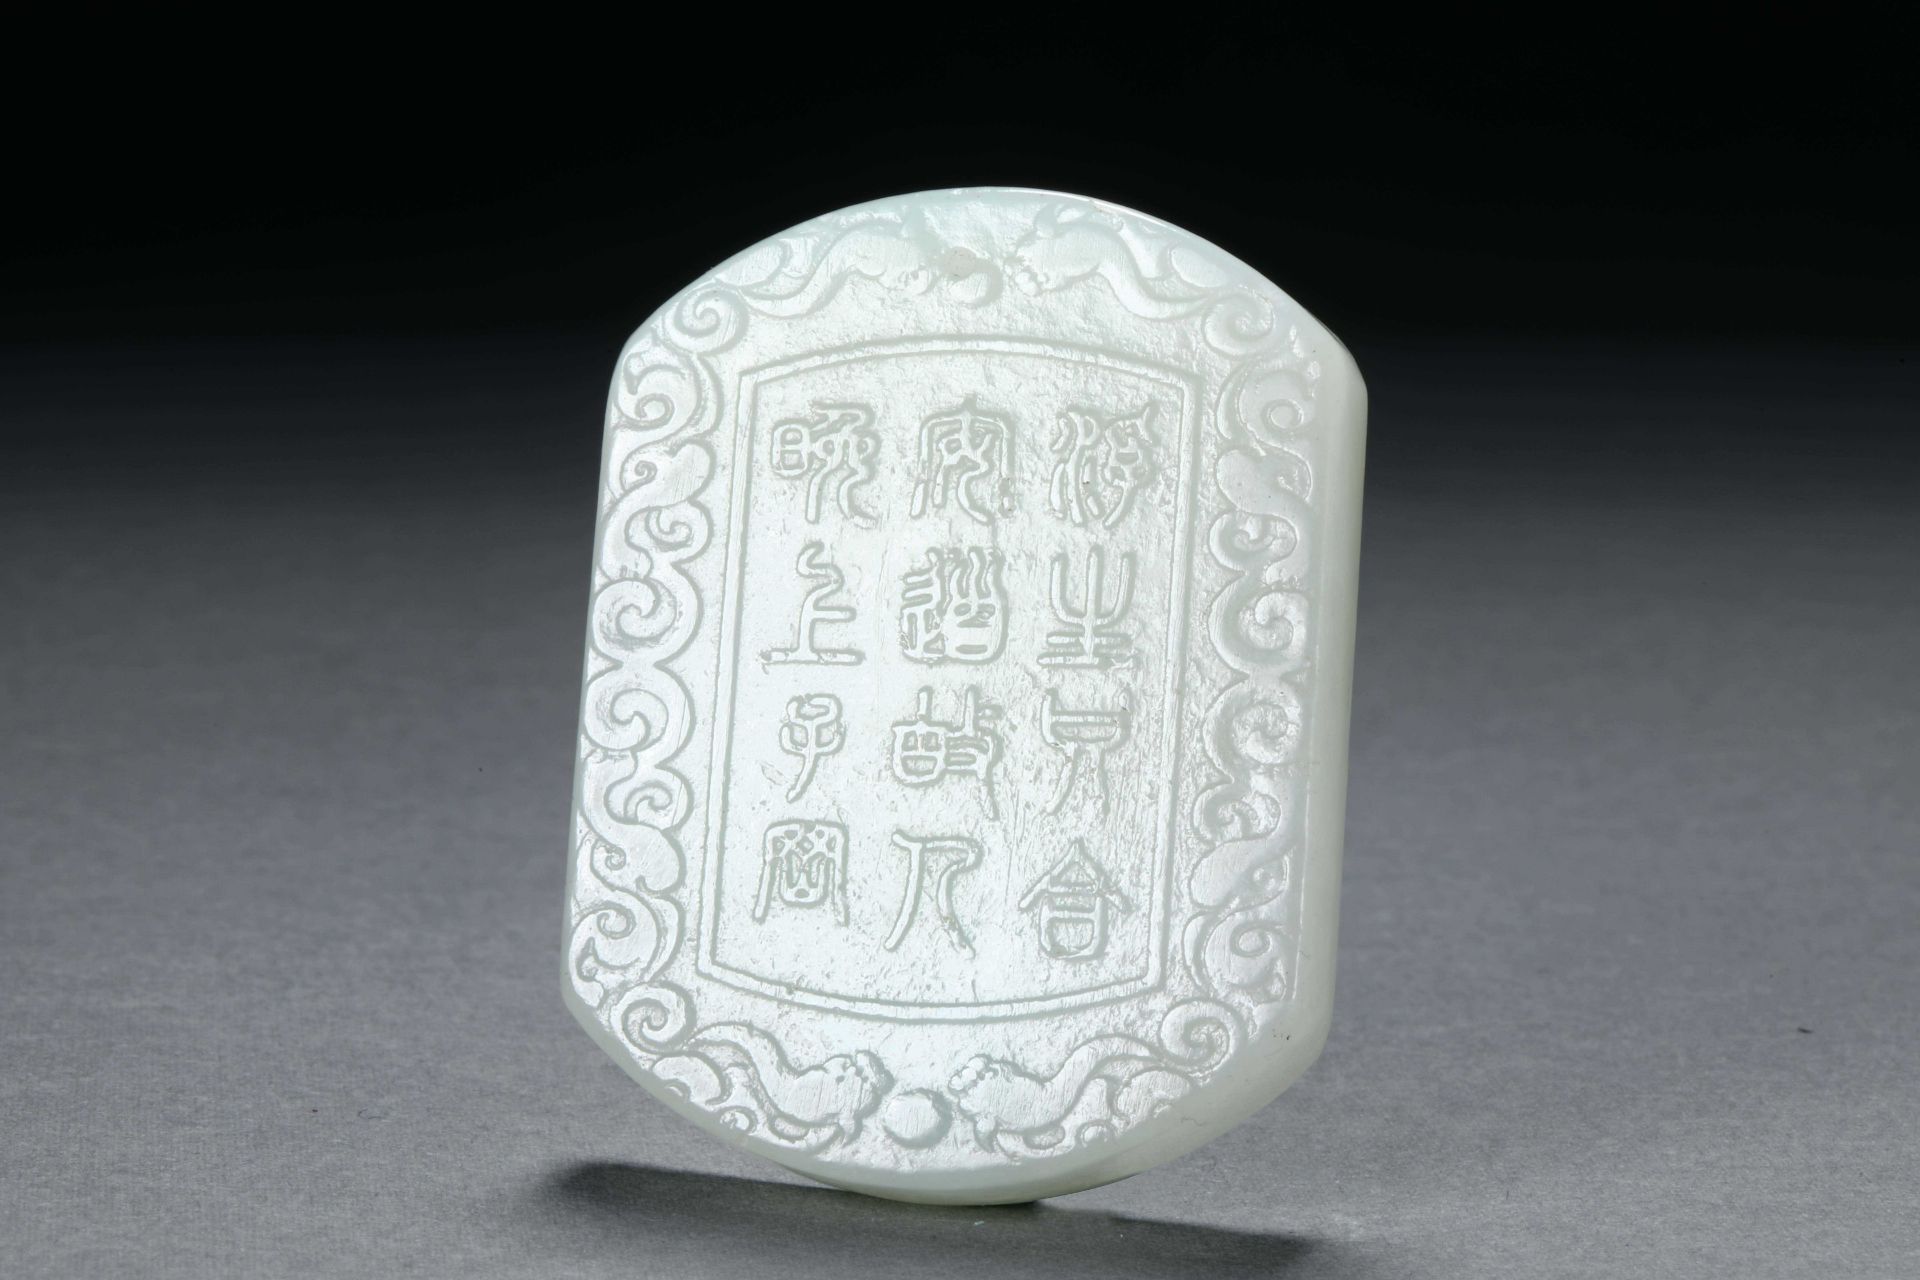 Hetian jade carved character card - Image 4 of 6